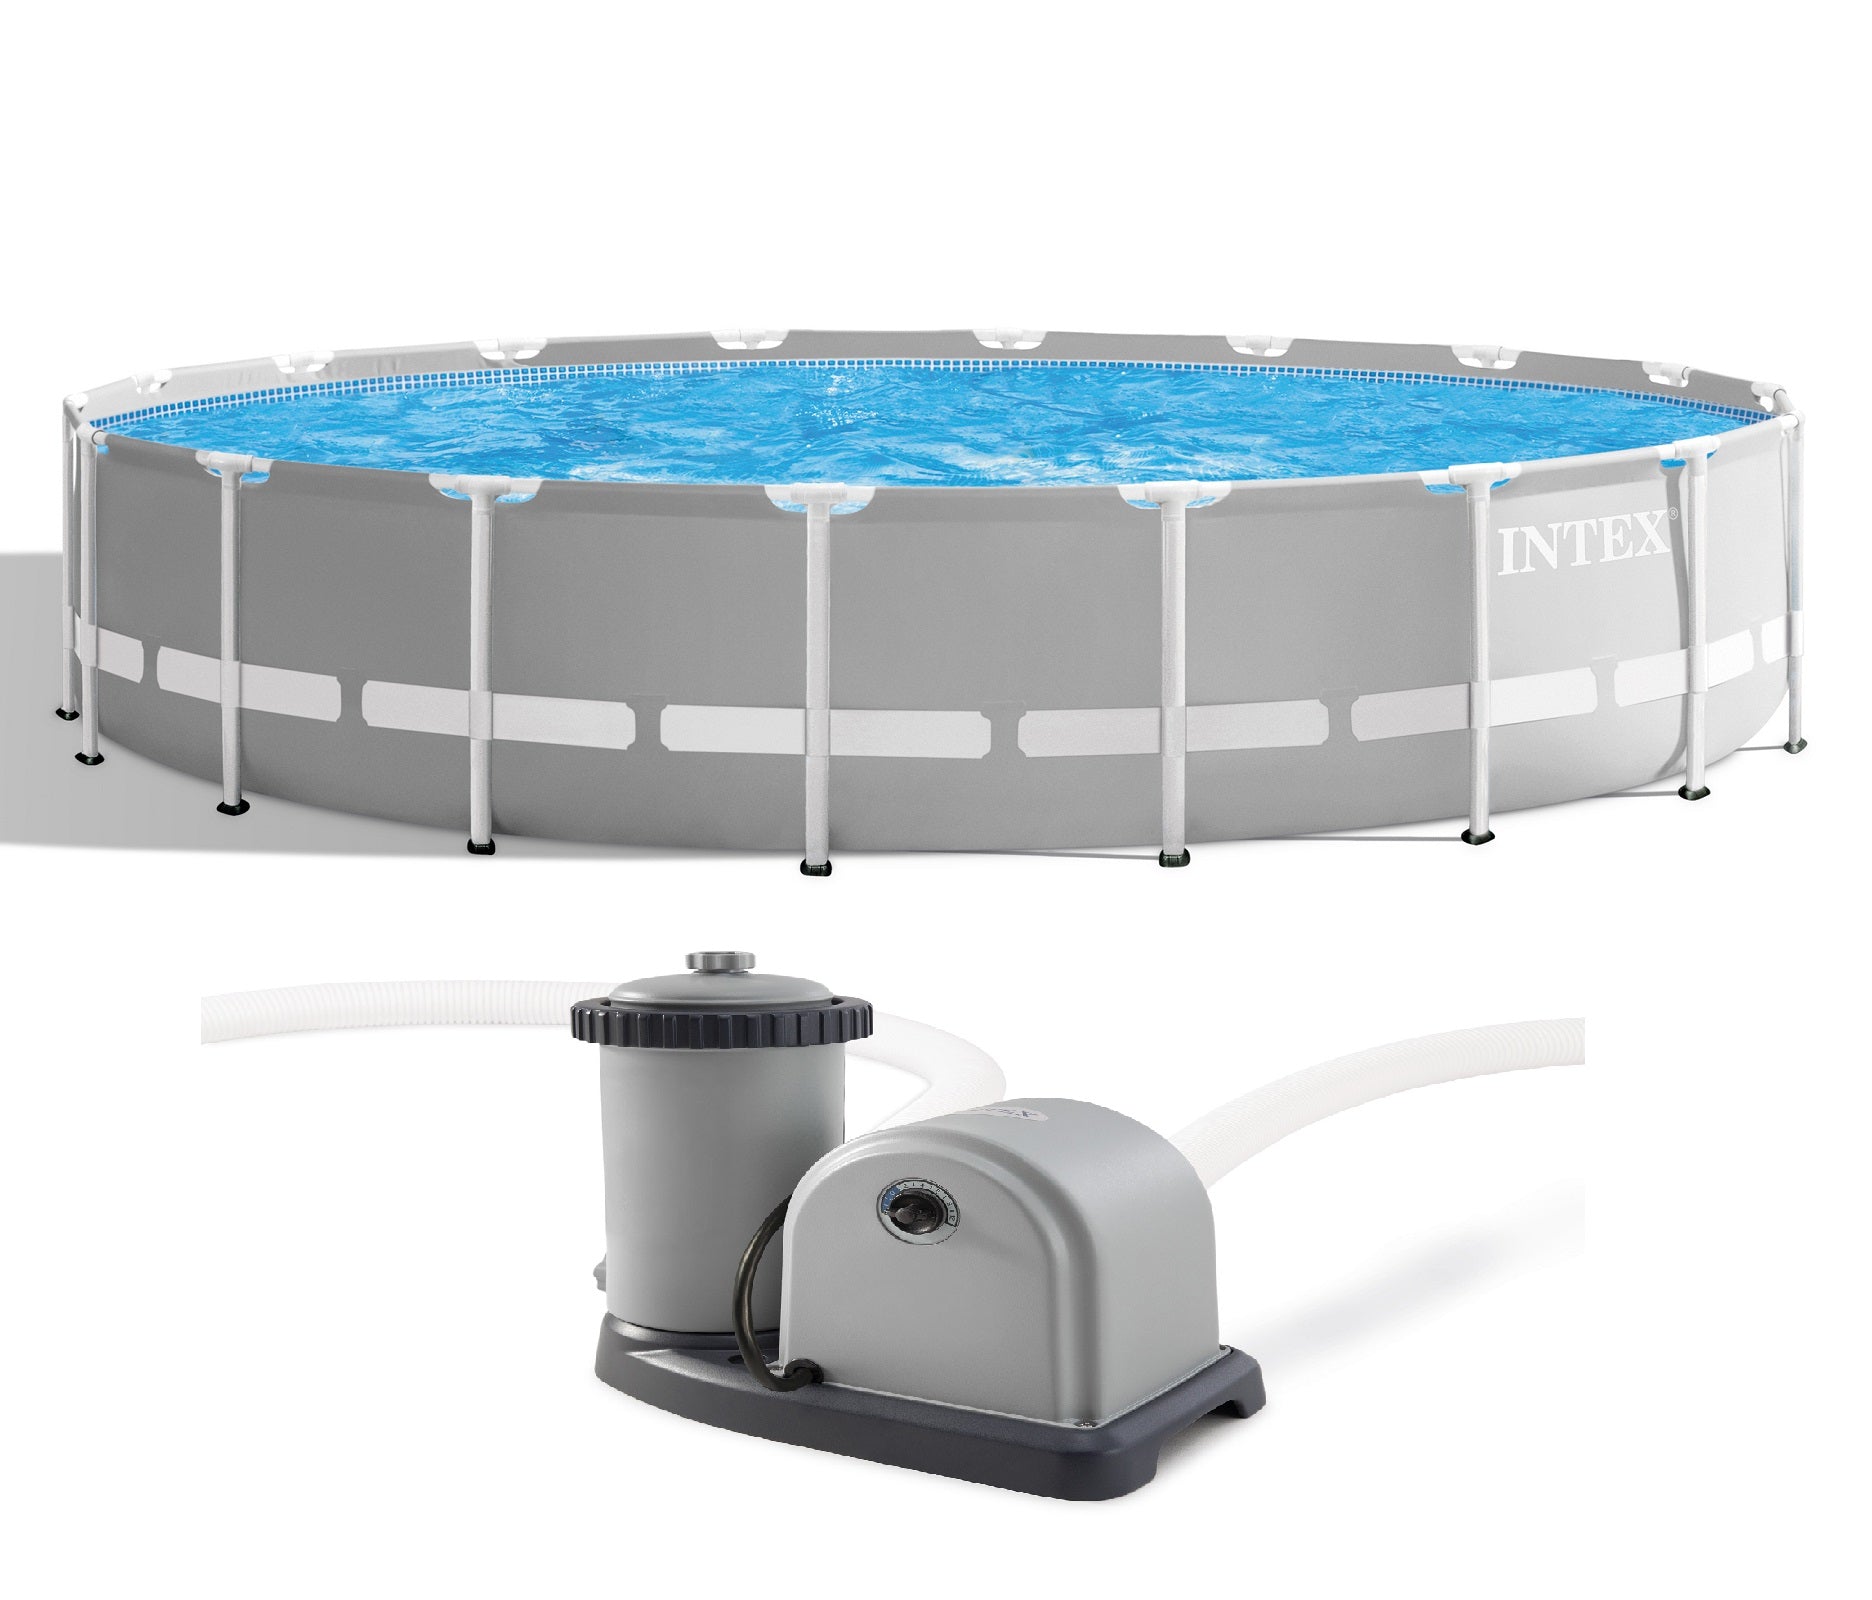 Intex 18ft X 48in Prism Frame Pool Set with Filter Pump, Ladder, Ground Cloth & Pool Cover